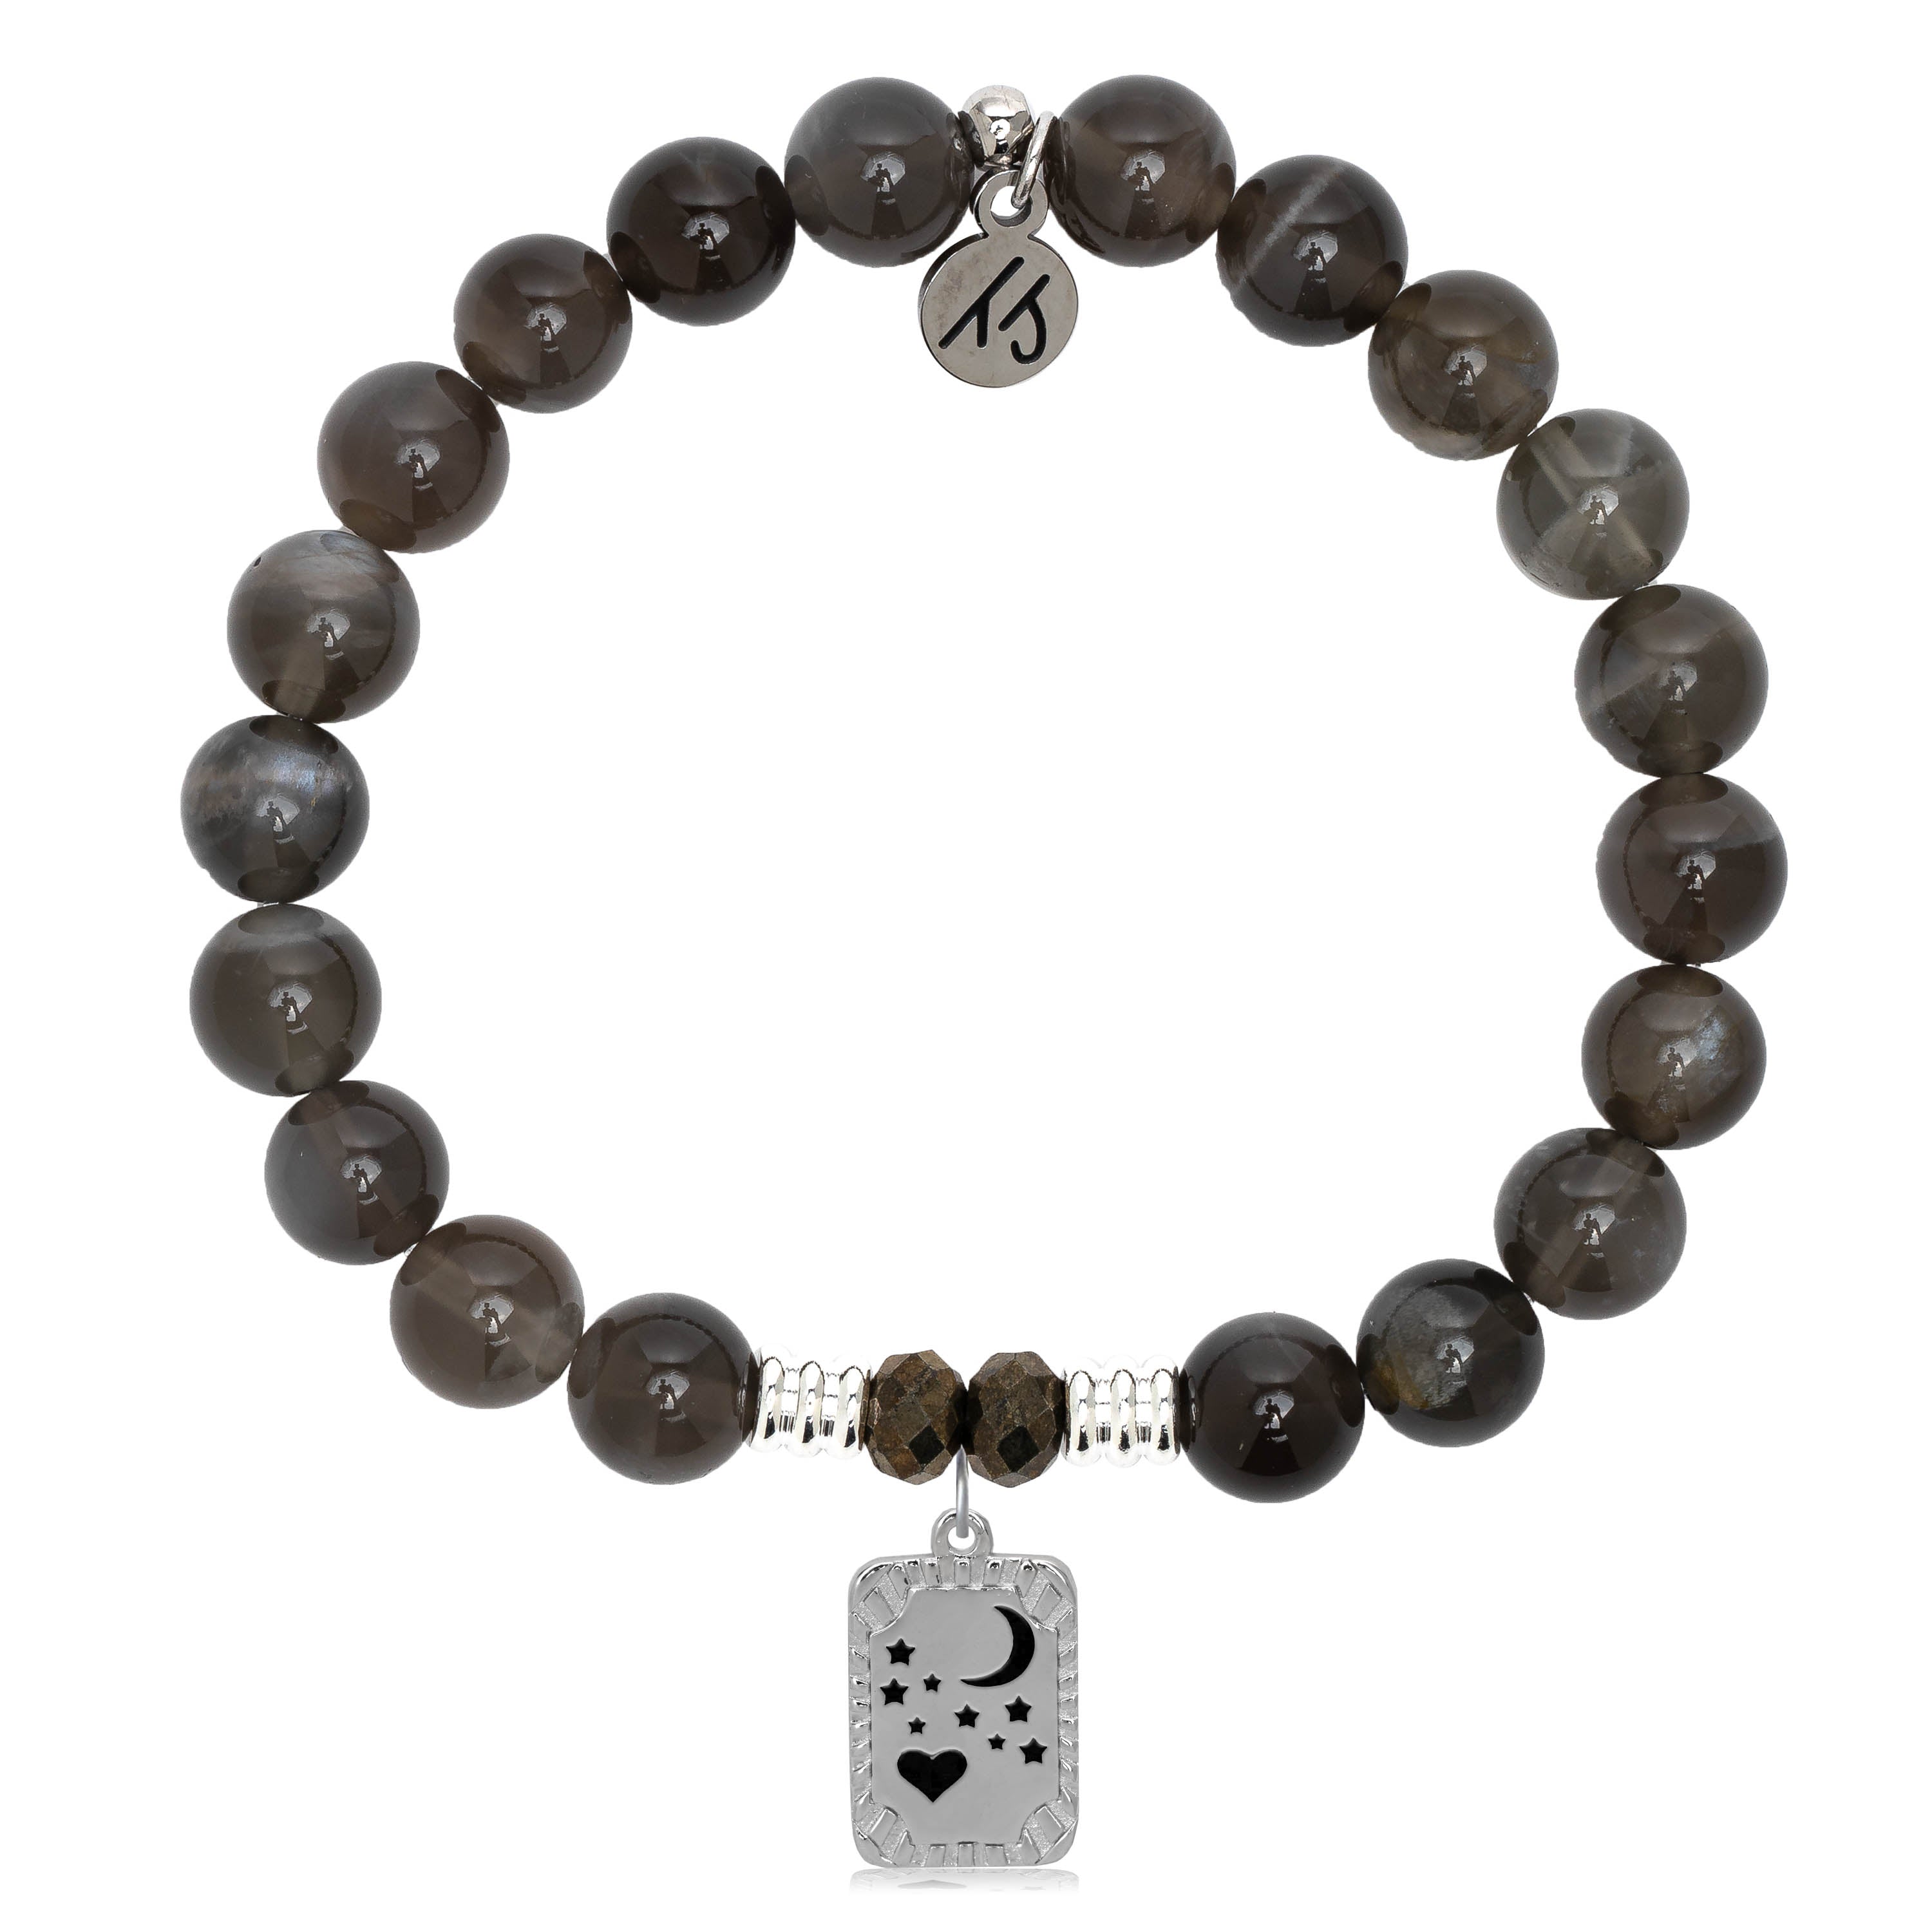 Black Moonstone Stone Bracelet with Moon and Back Sterling Silver Charm